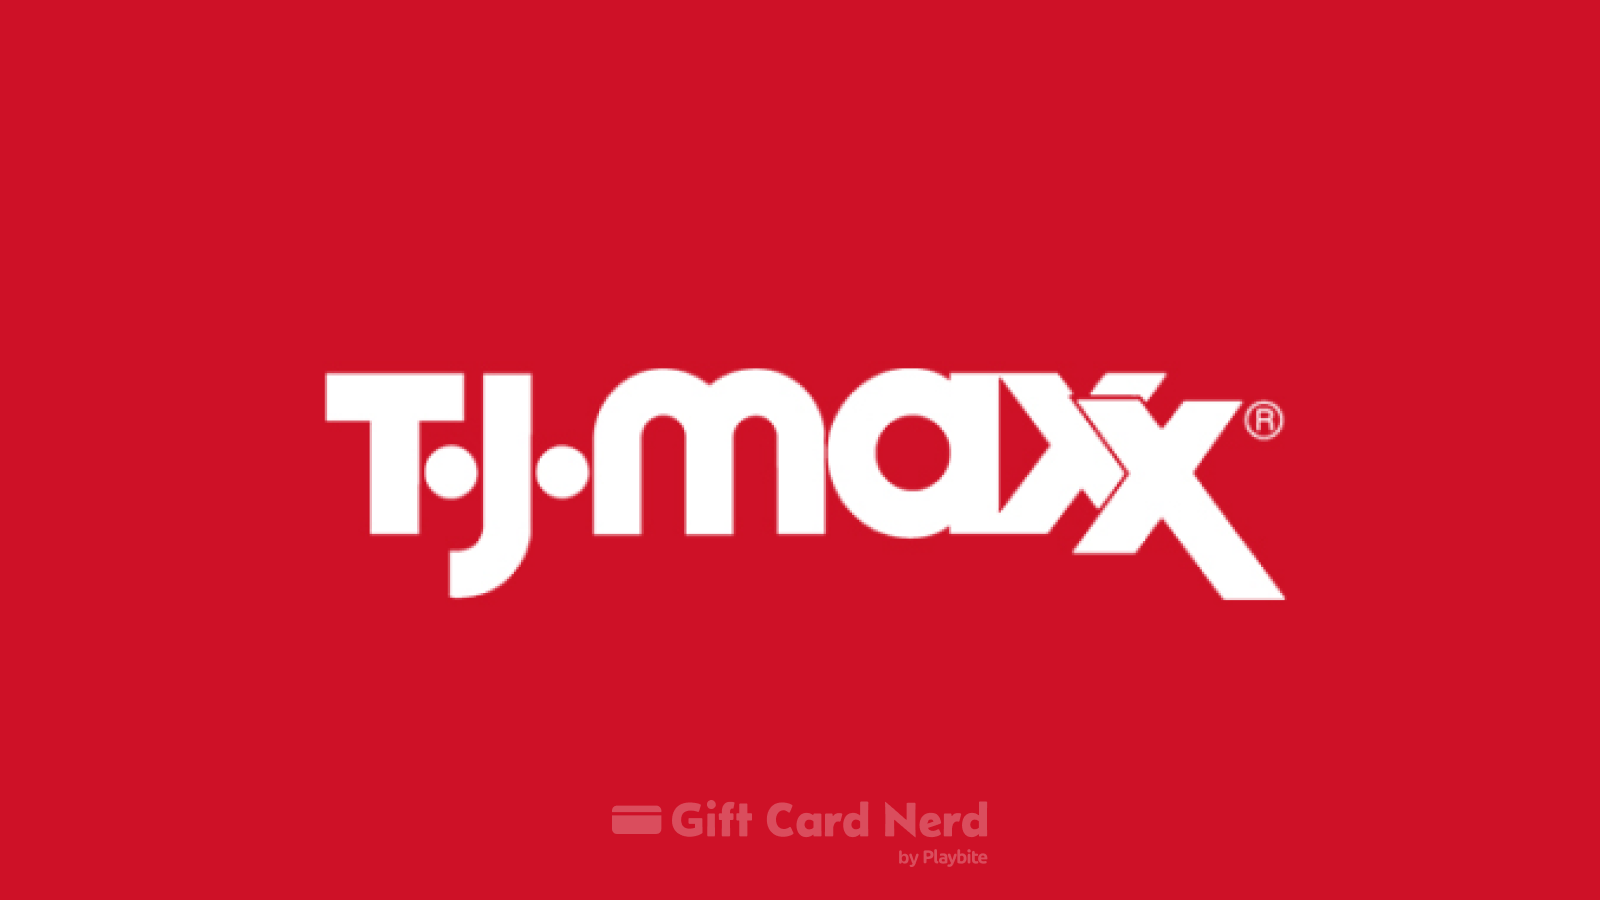 Can You Buy TJ Maxx Gift Cards on Amazon?